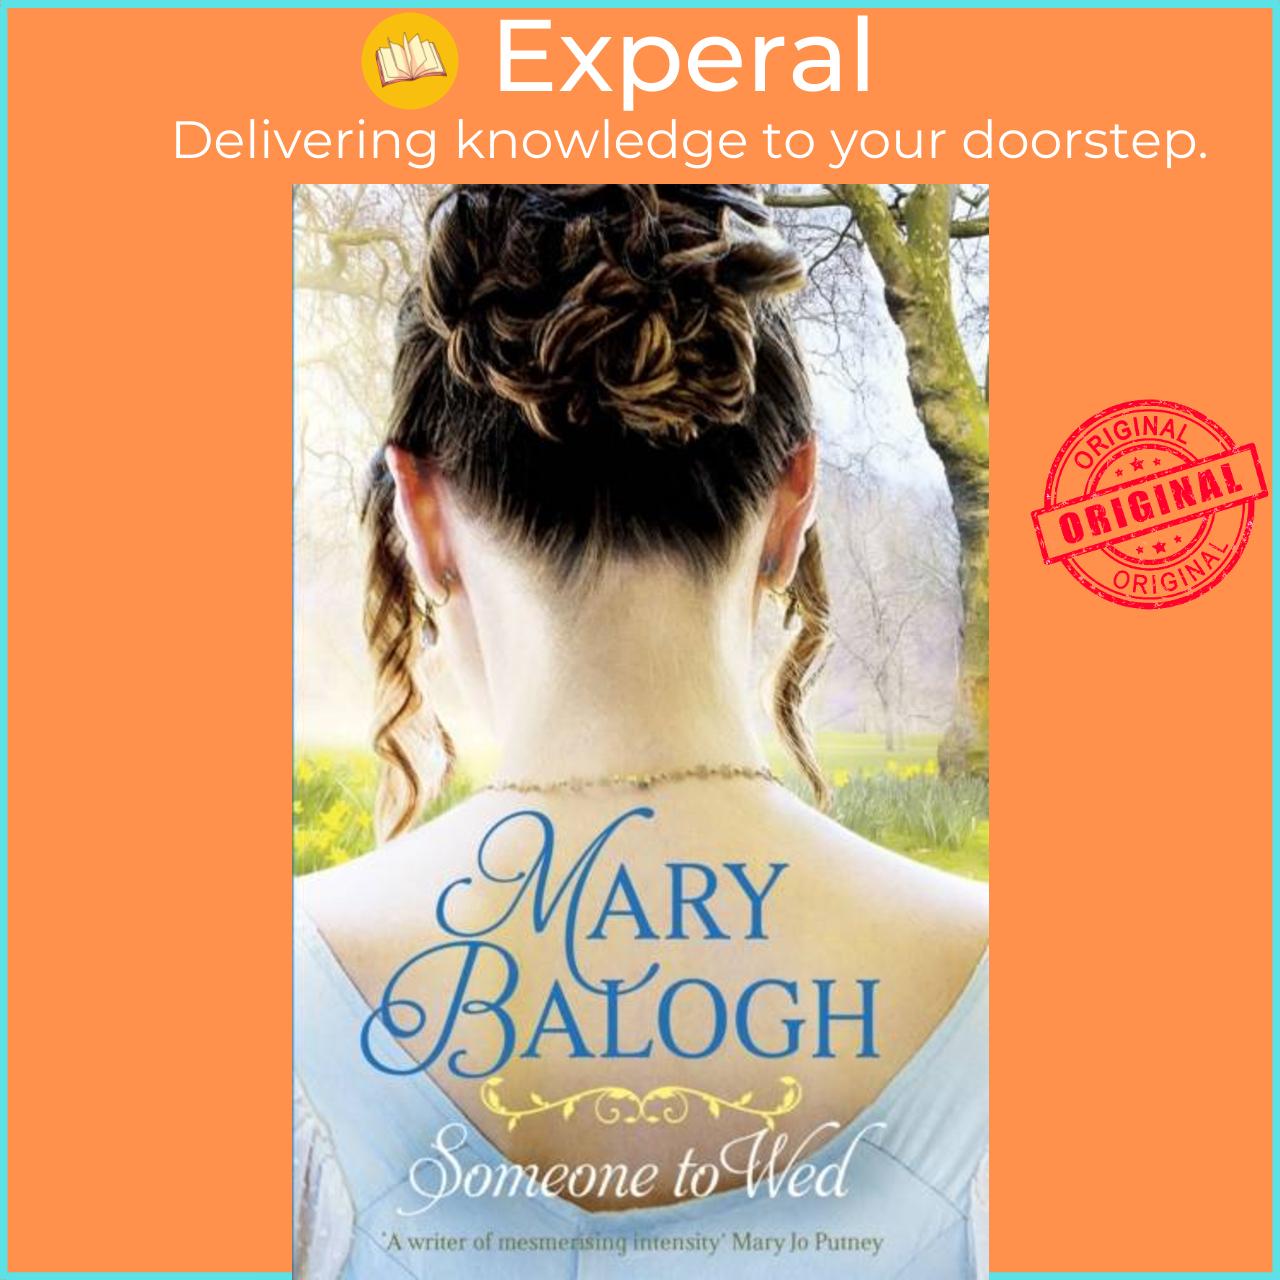 Sách - Someone to Wed by Mary Balogh (UK edition, paperback)